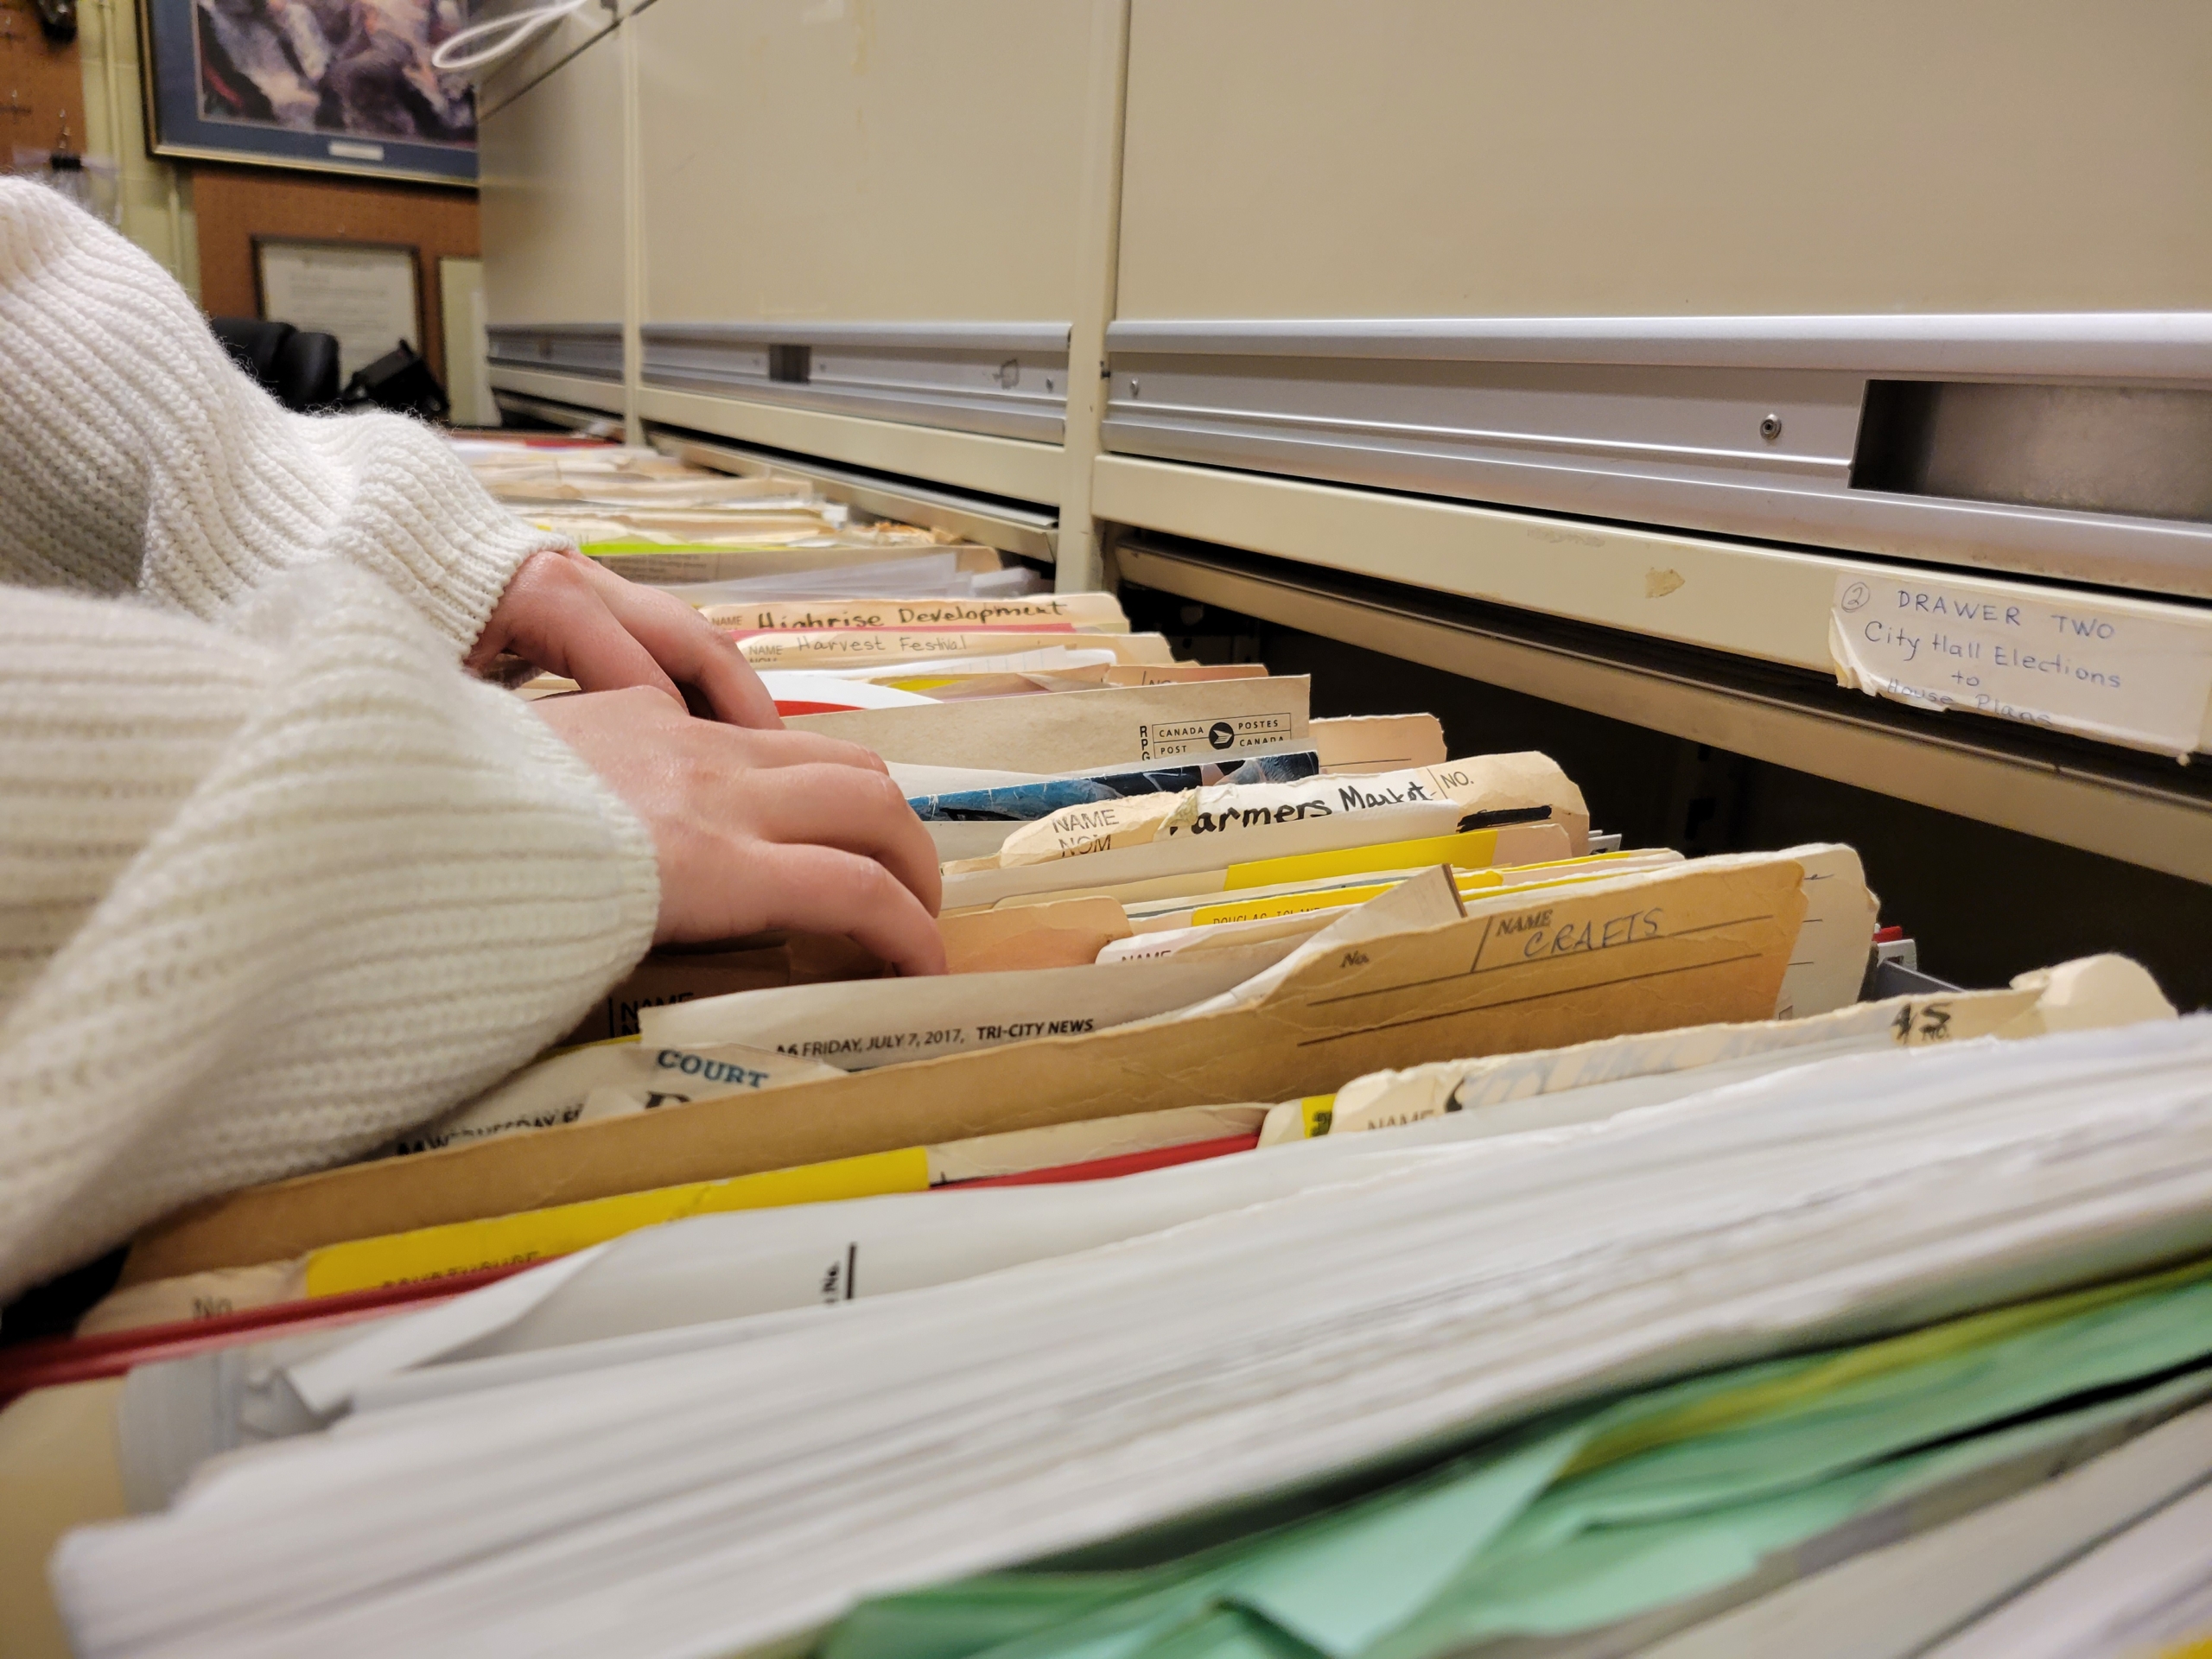 A closeup of a person's hands sorting through drawers of crowded stand-up files